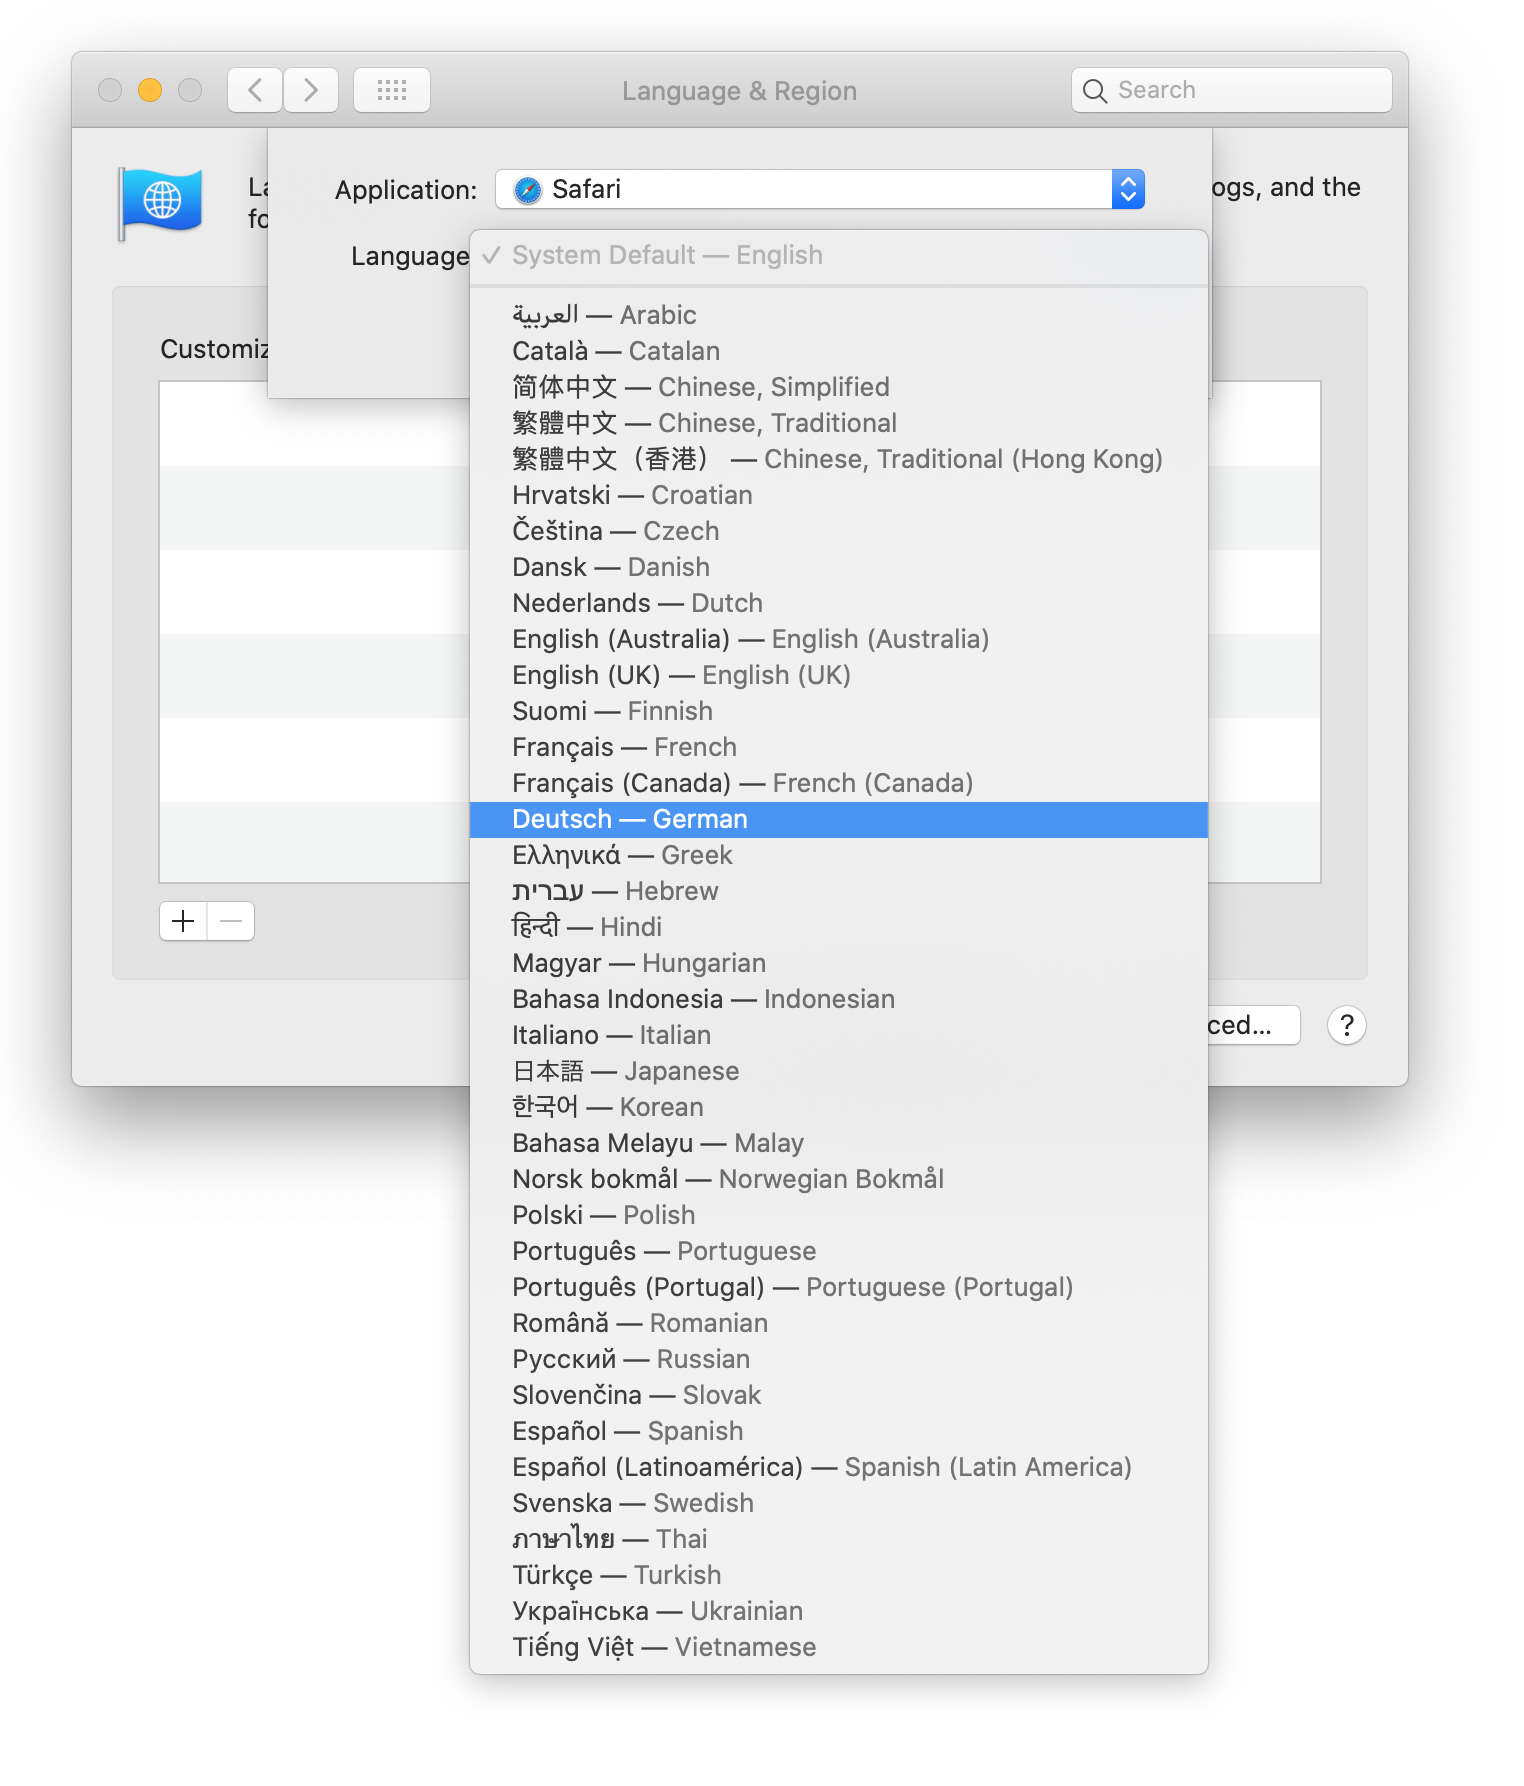 A screenshot of the Mac Language & Region settings. A window to add a new app to the list is open, and Safari has been selected from the Application drop-down menu options in the Application field. German is highlighted in the Language drop-down menu.